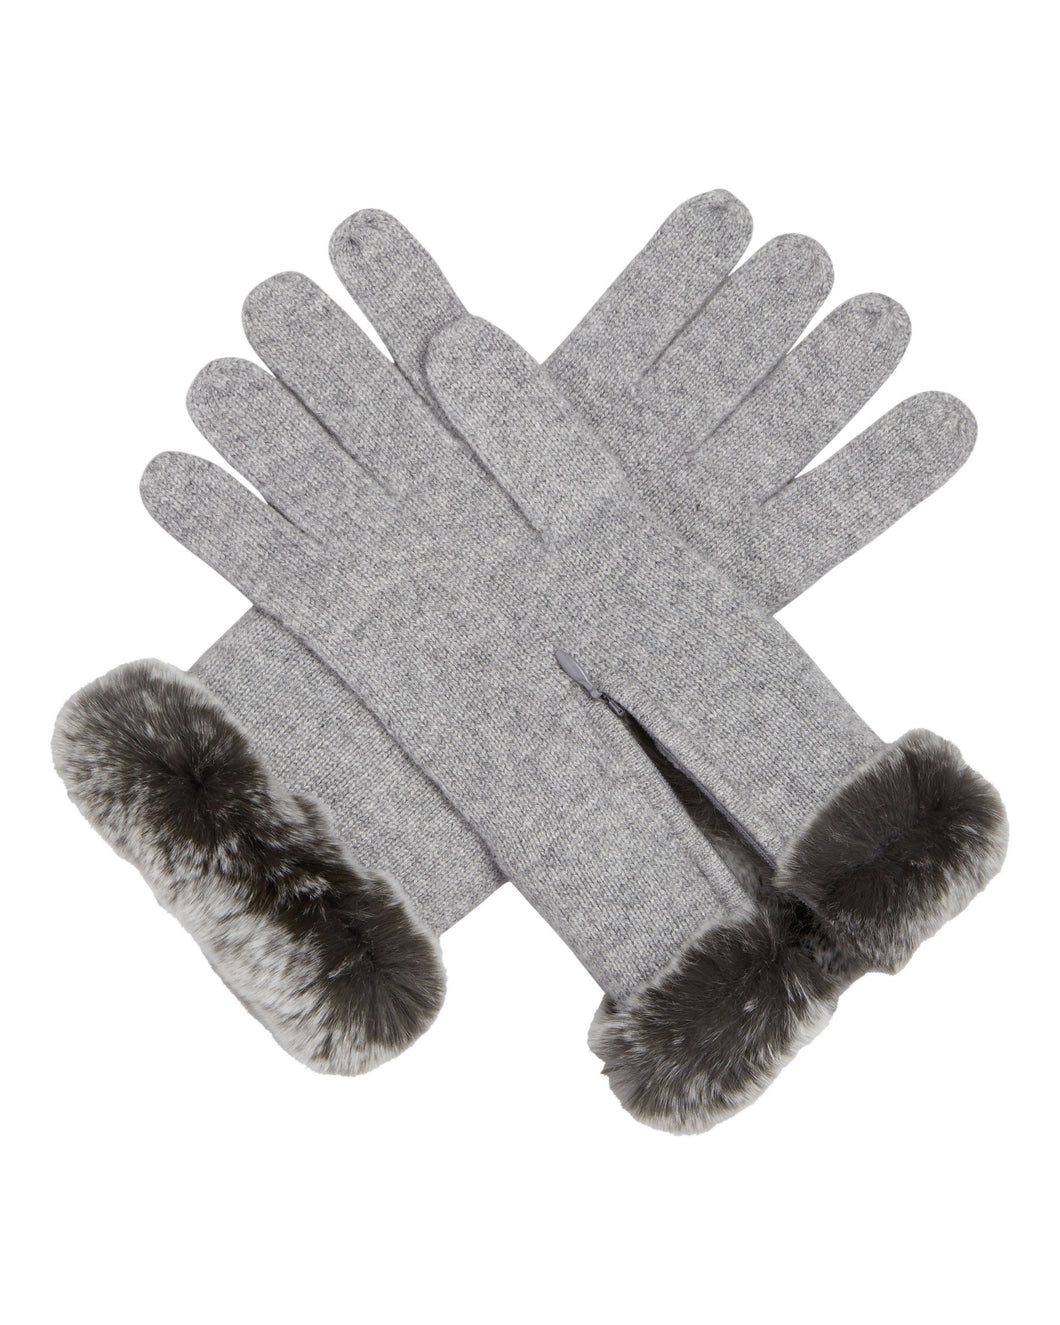 N.Peal Women's Fur And Cashmere Gloves Flannel Grey